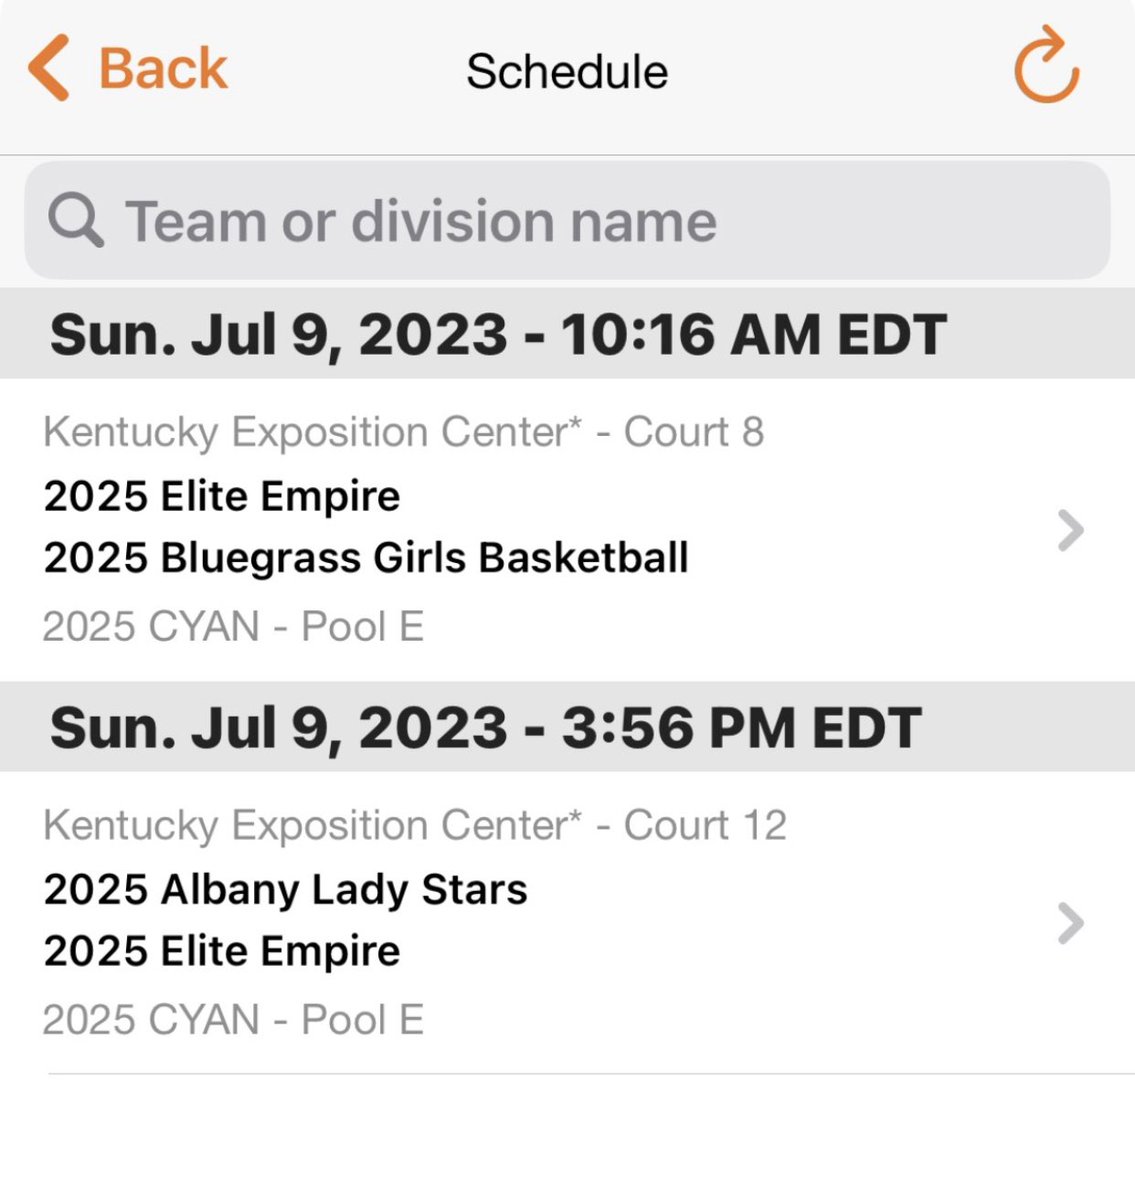 I’ll be at Run 4 the Roses this weekend!! Can’t wait! @JUCoachLawhon @Bryan_WBB @EliteEmpireB @LadyEagles_BKB @MilliganWBB @CoachRickReeves @Senator_WBB @HoopnCoach21